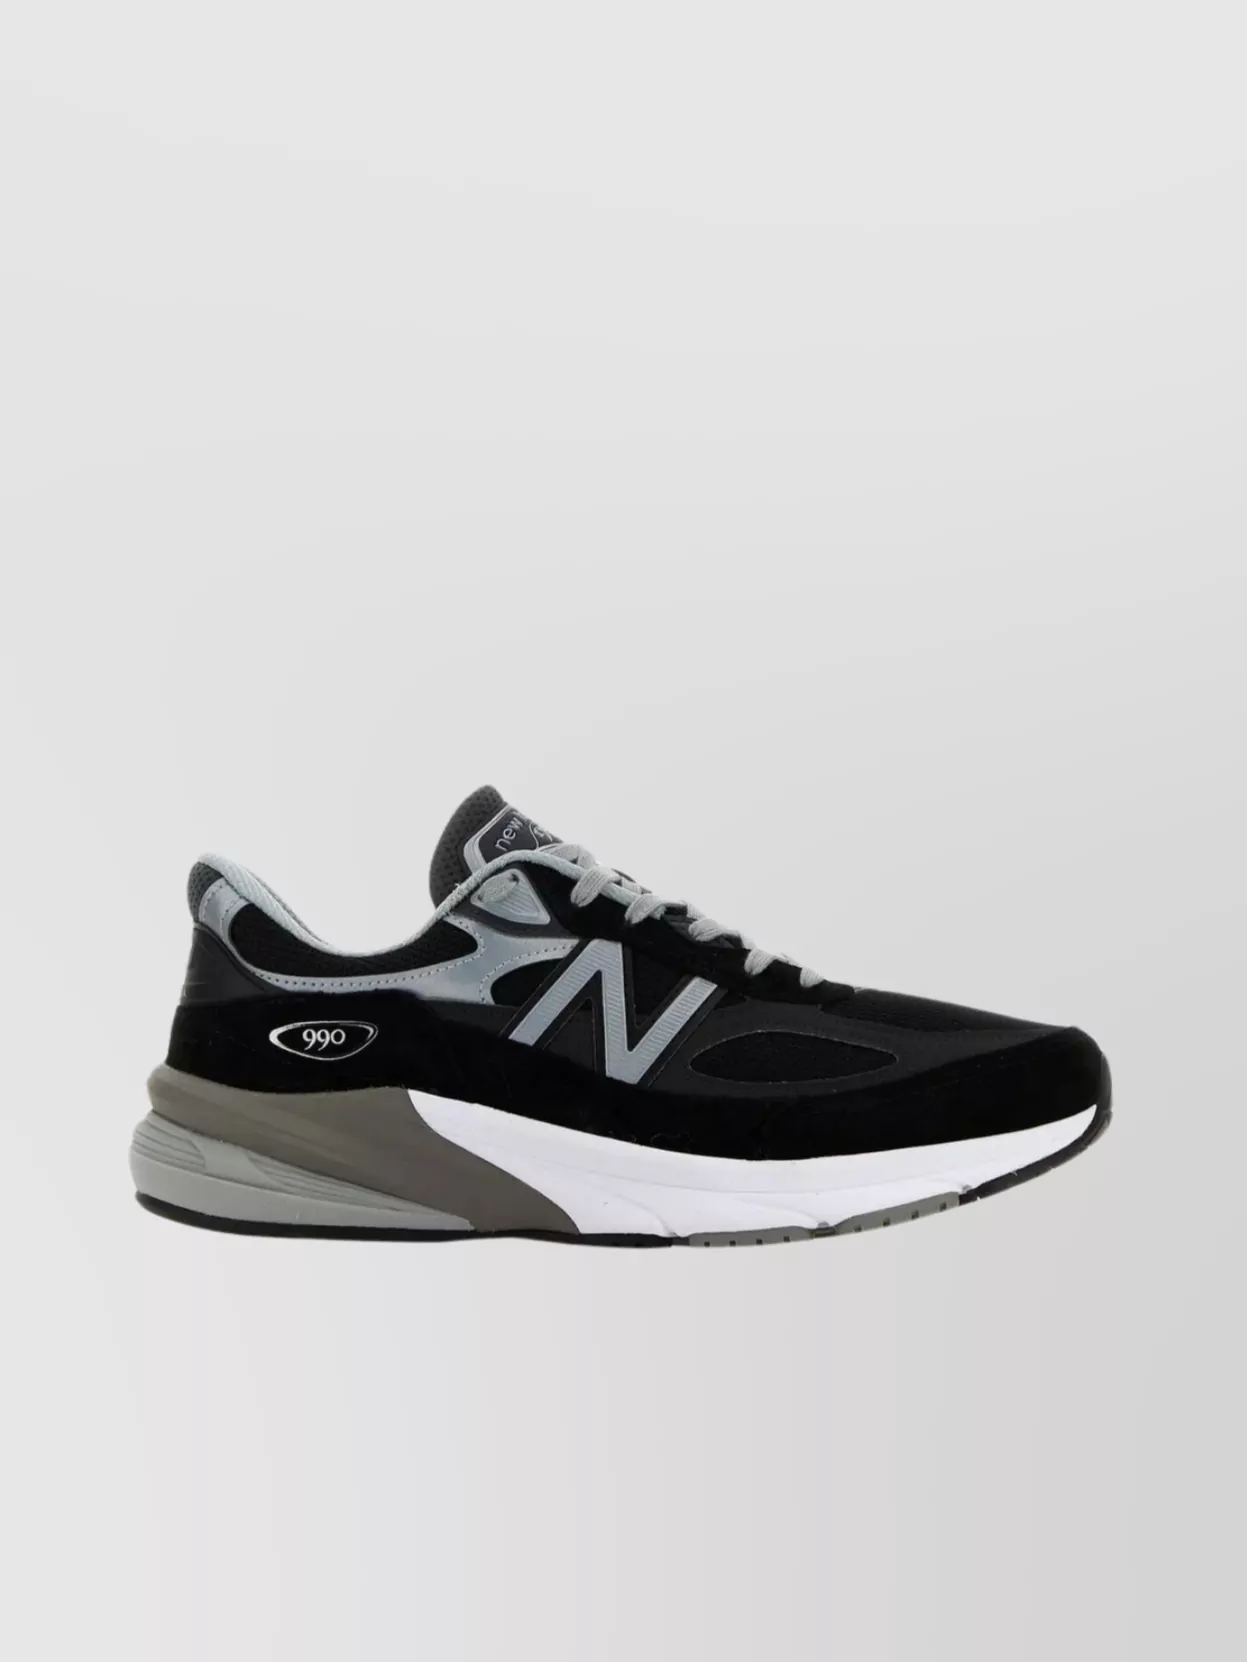 Shop New Balance 990v6 Sneakers With Multifabric And Suede